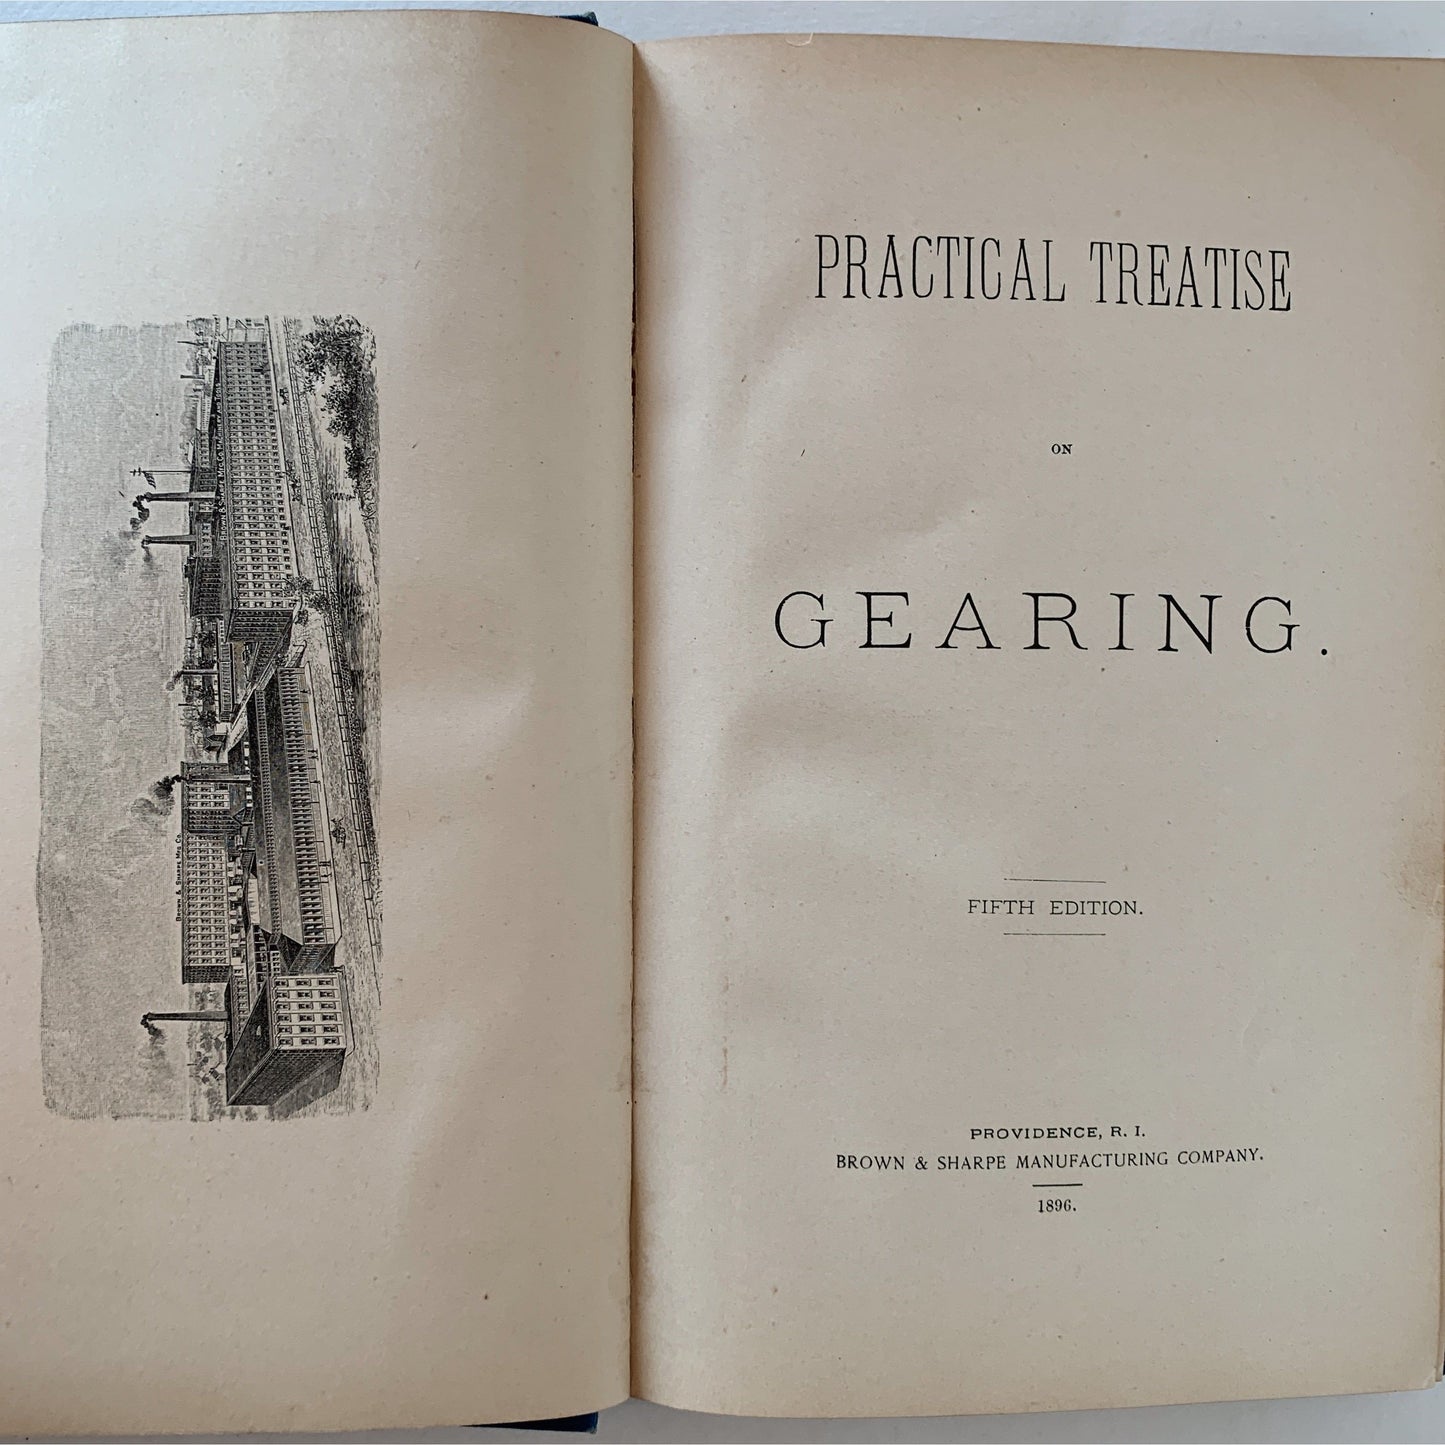 Practical Treatise on Gearing, Illustrated Technical Book, 1896